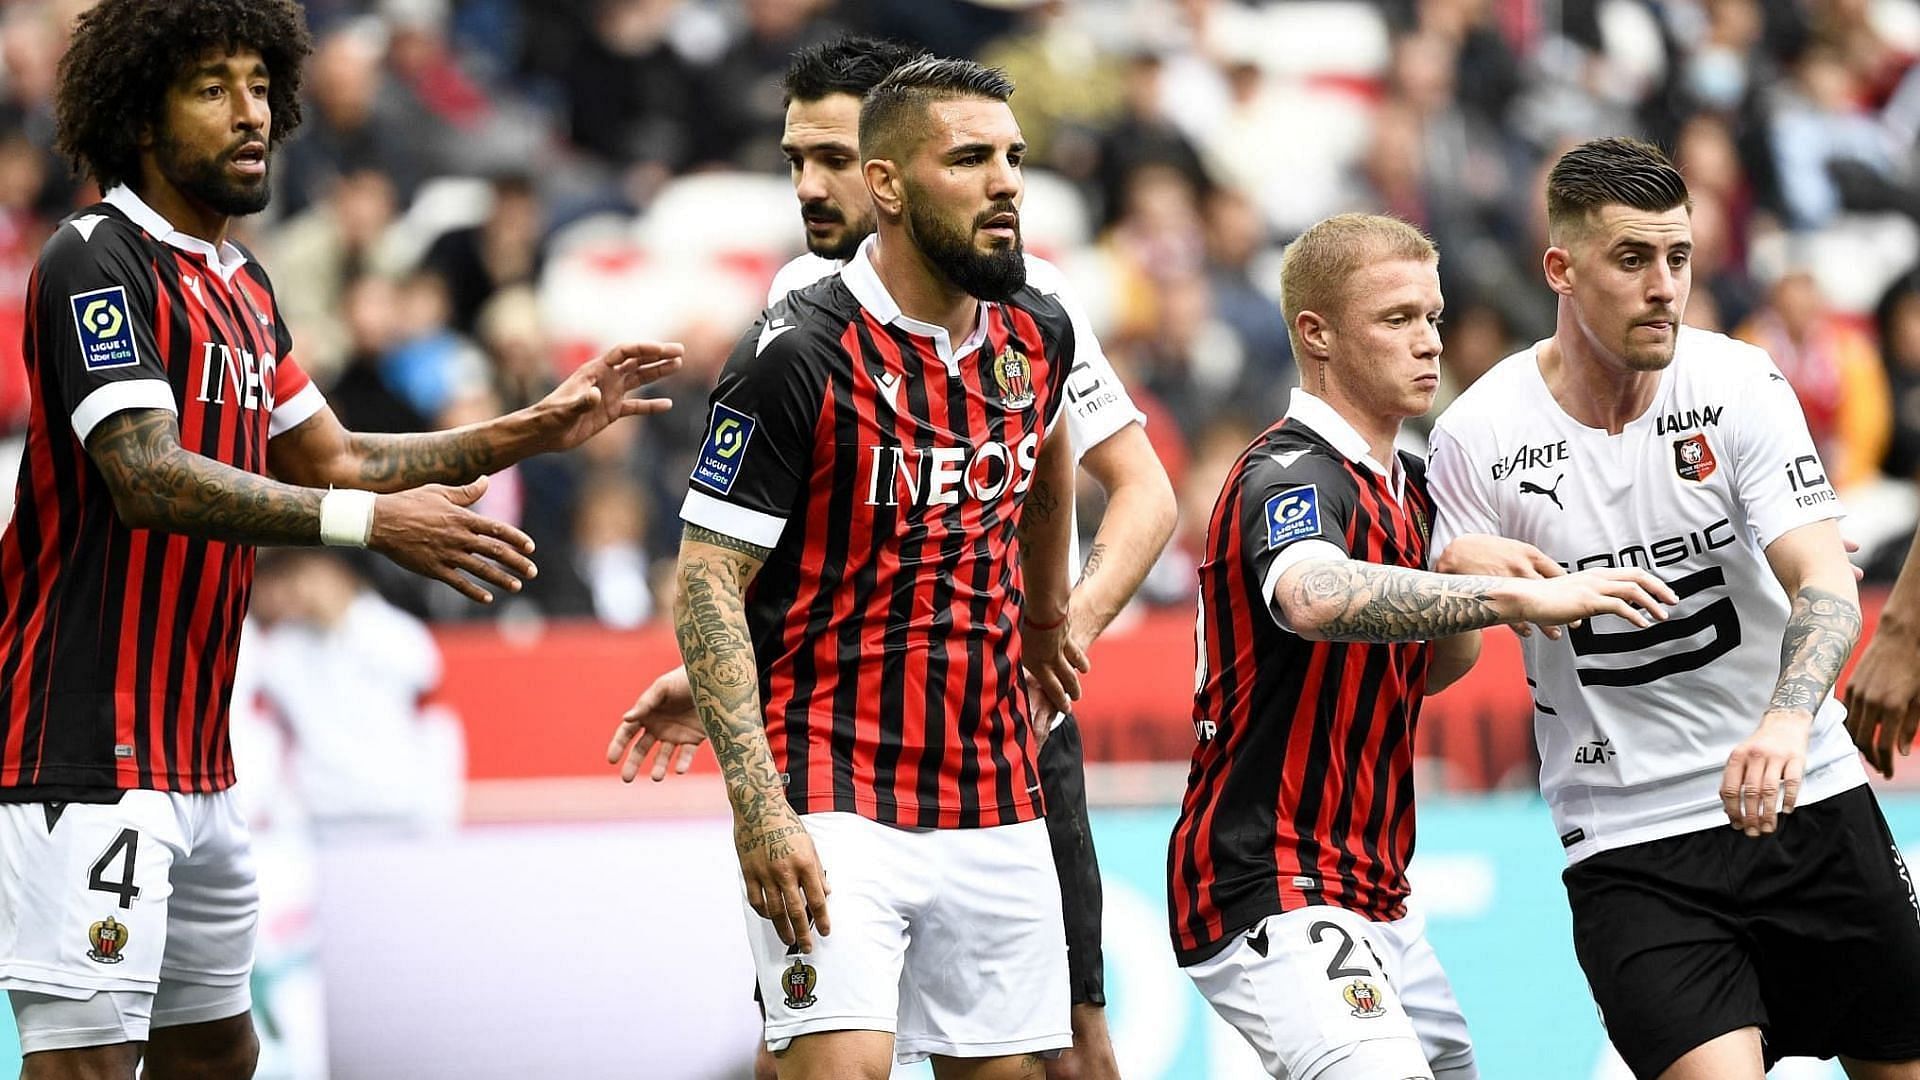 Rennes and Nice will meet in the Ligue 1 on Saturday